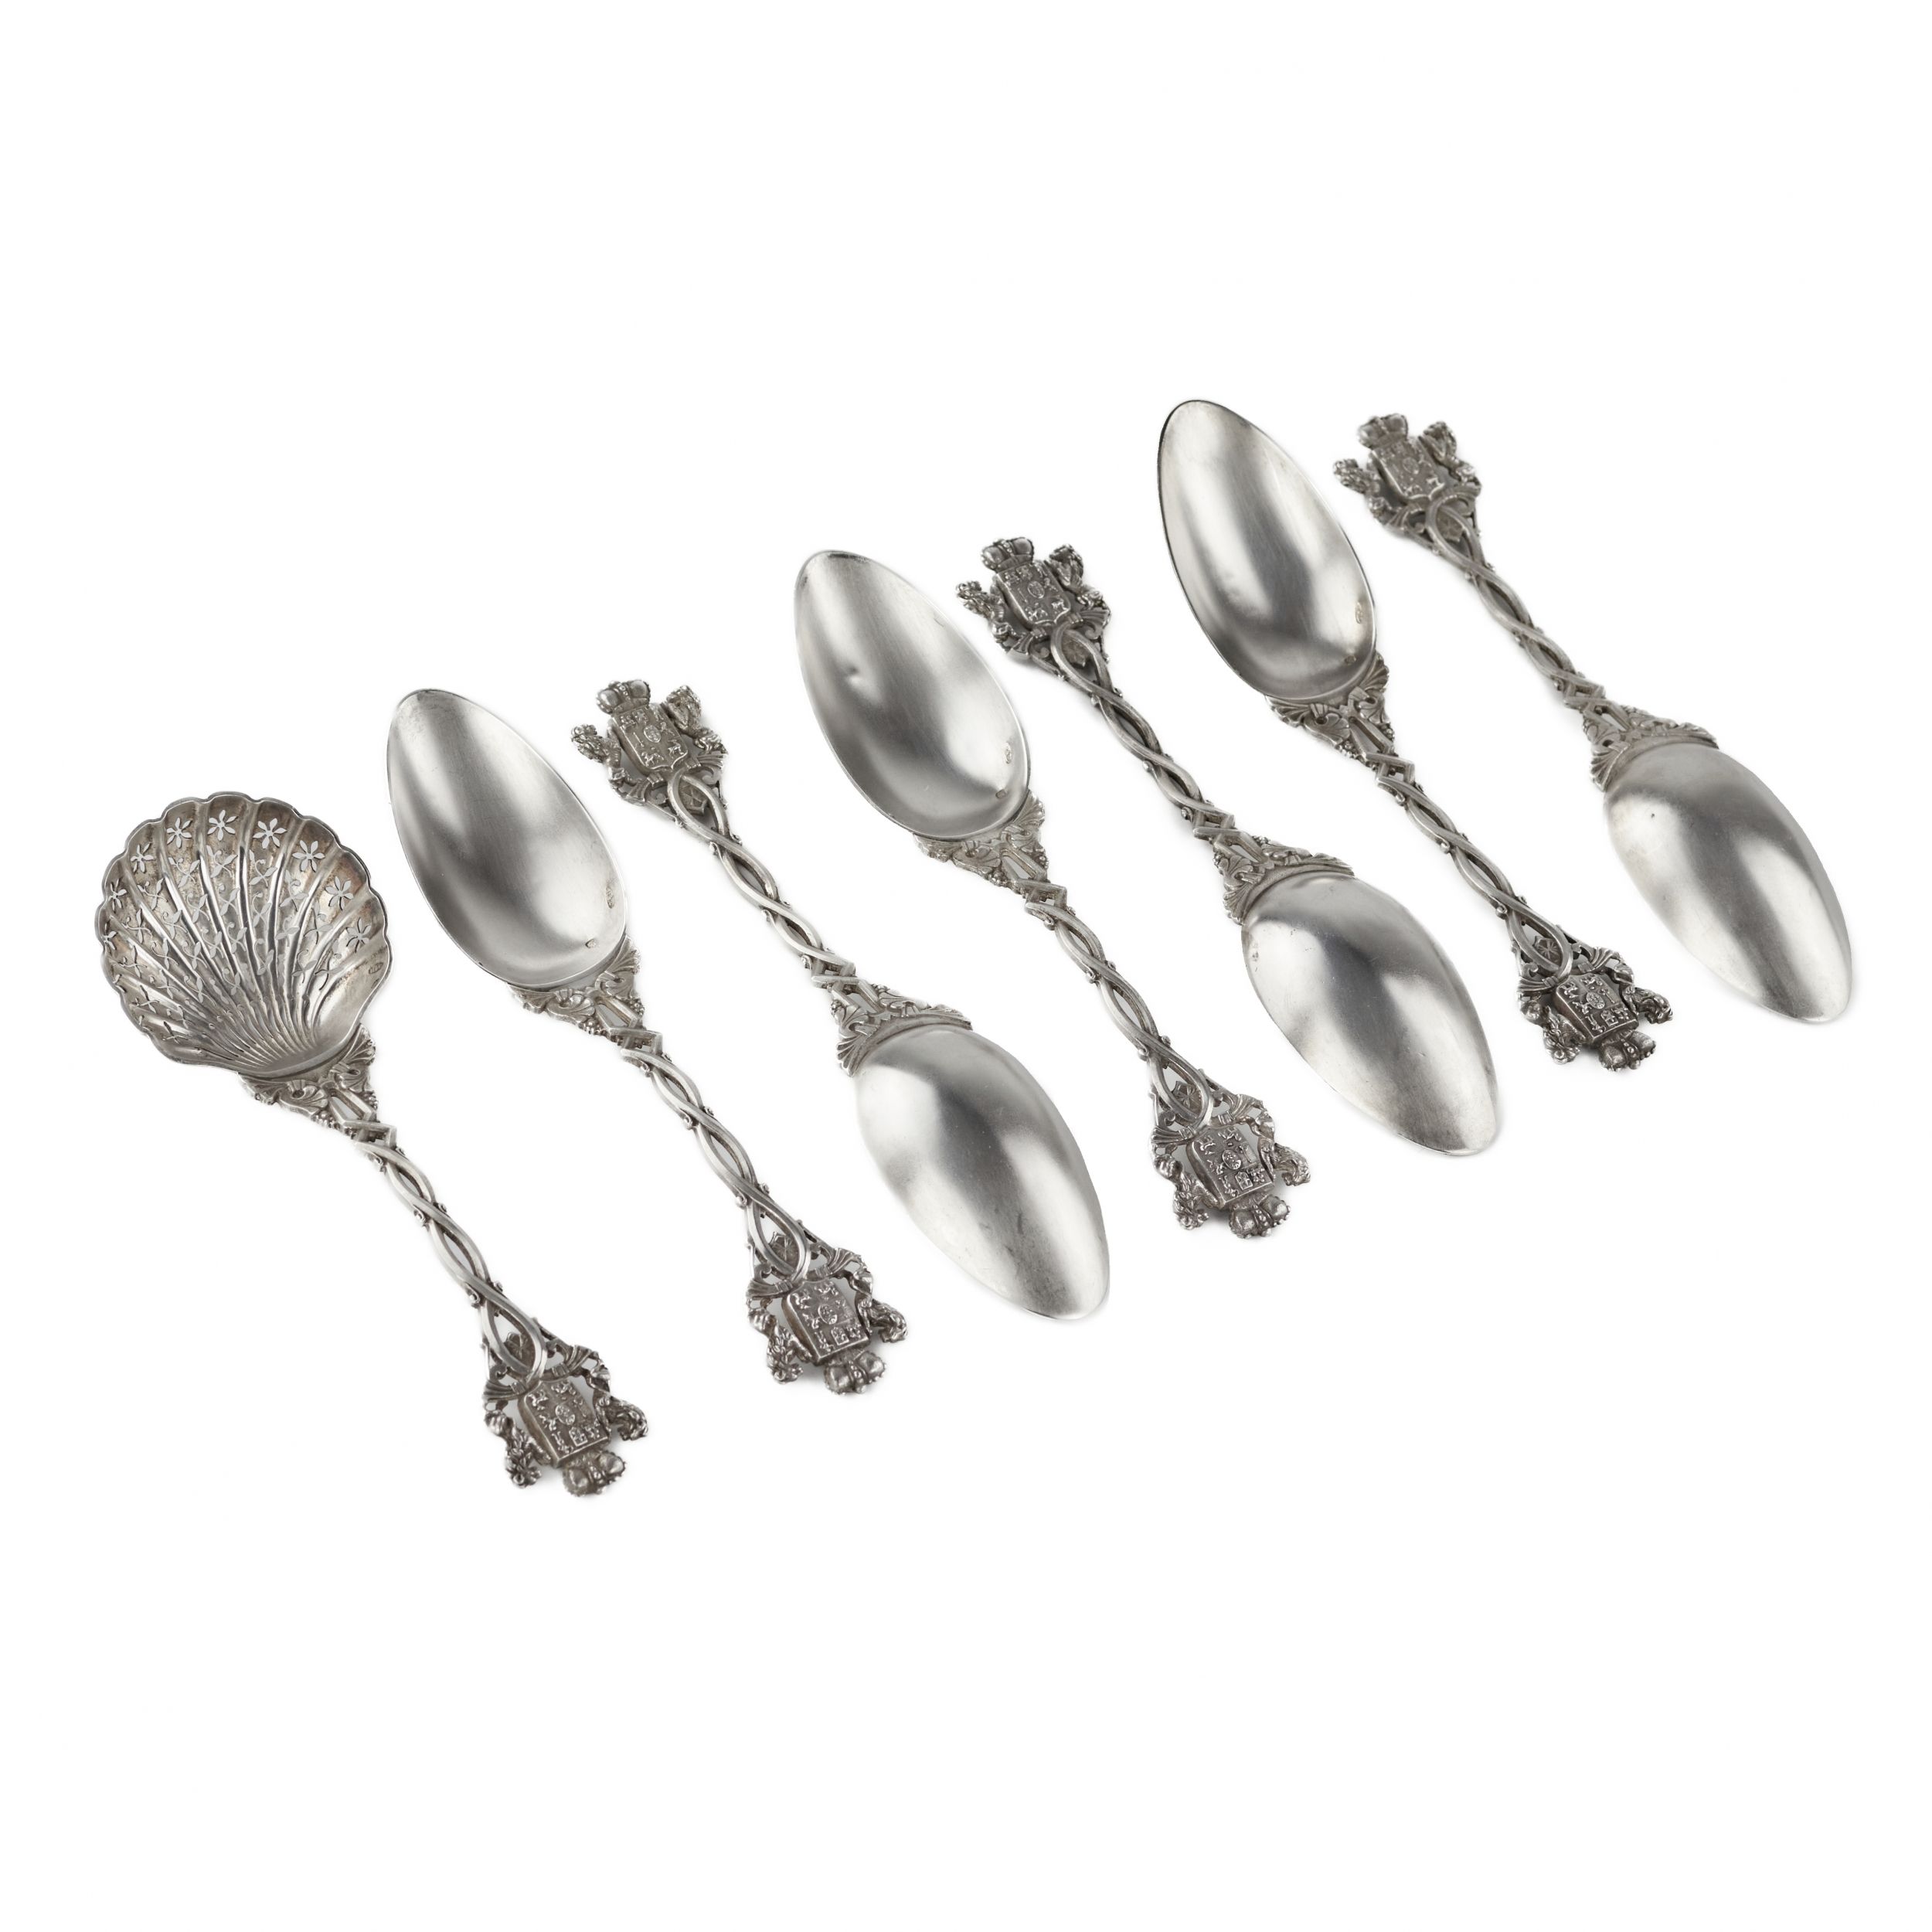 A-set-of-silver-spoons-from-the-Scandinavian-service-of-Prince-Yusupov-Alex-GueytonParis-19th-century